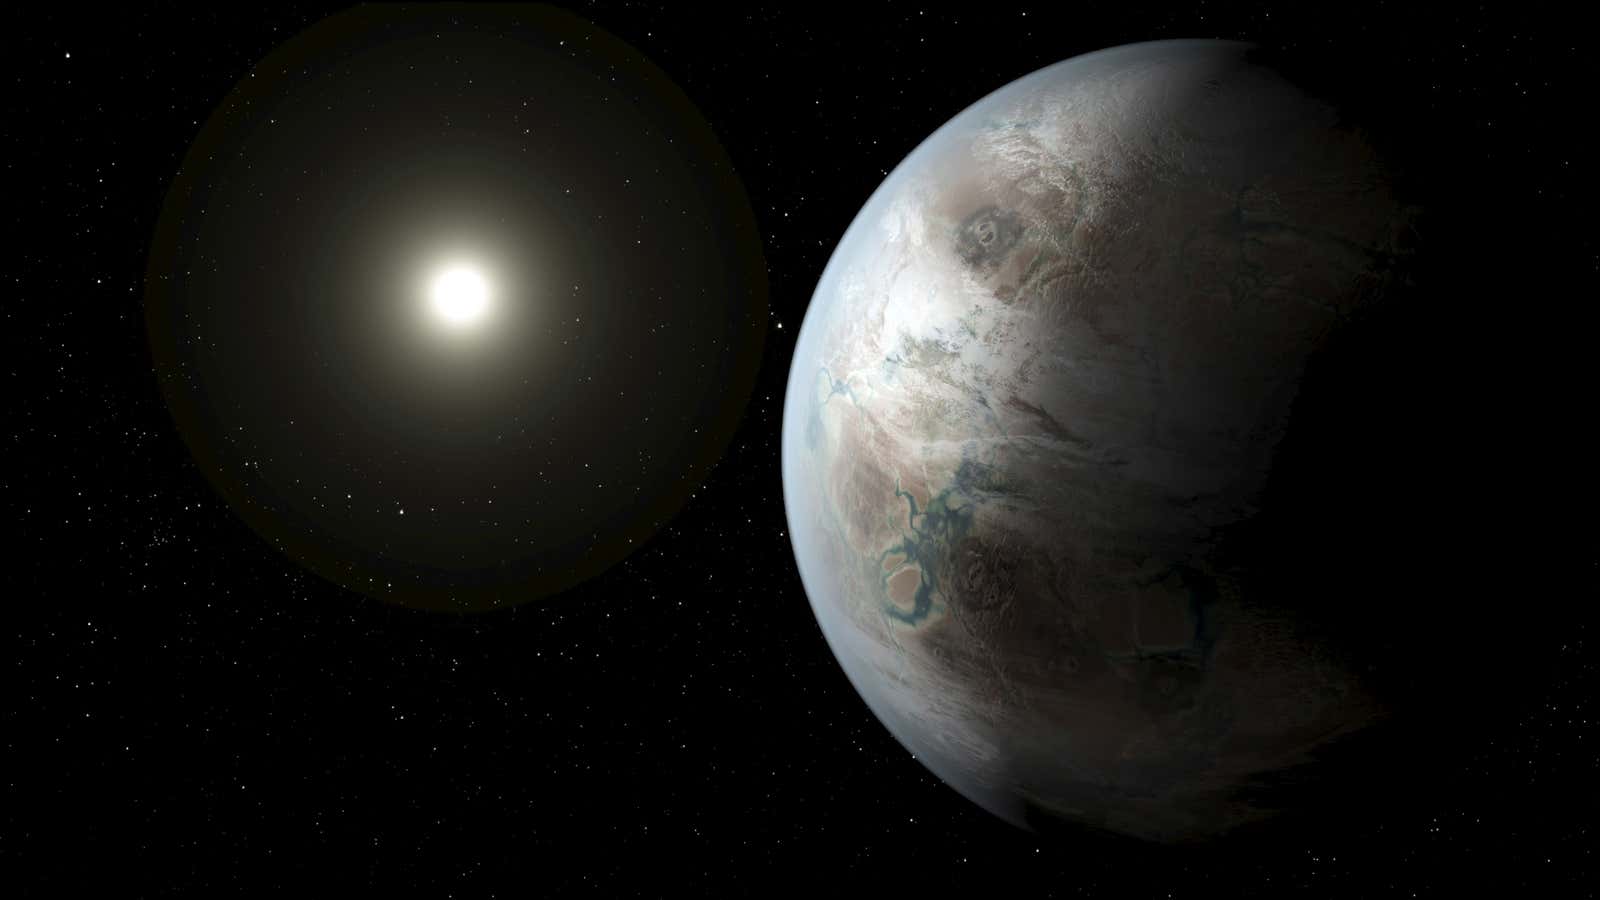 A NASA illustration depicts one possible appearance of the planet Kepler-452b